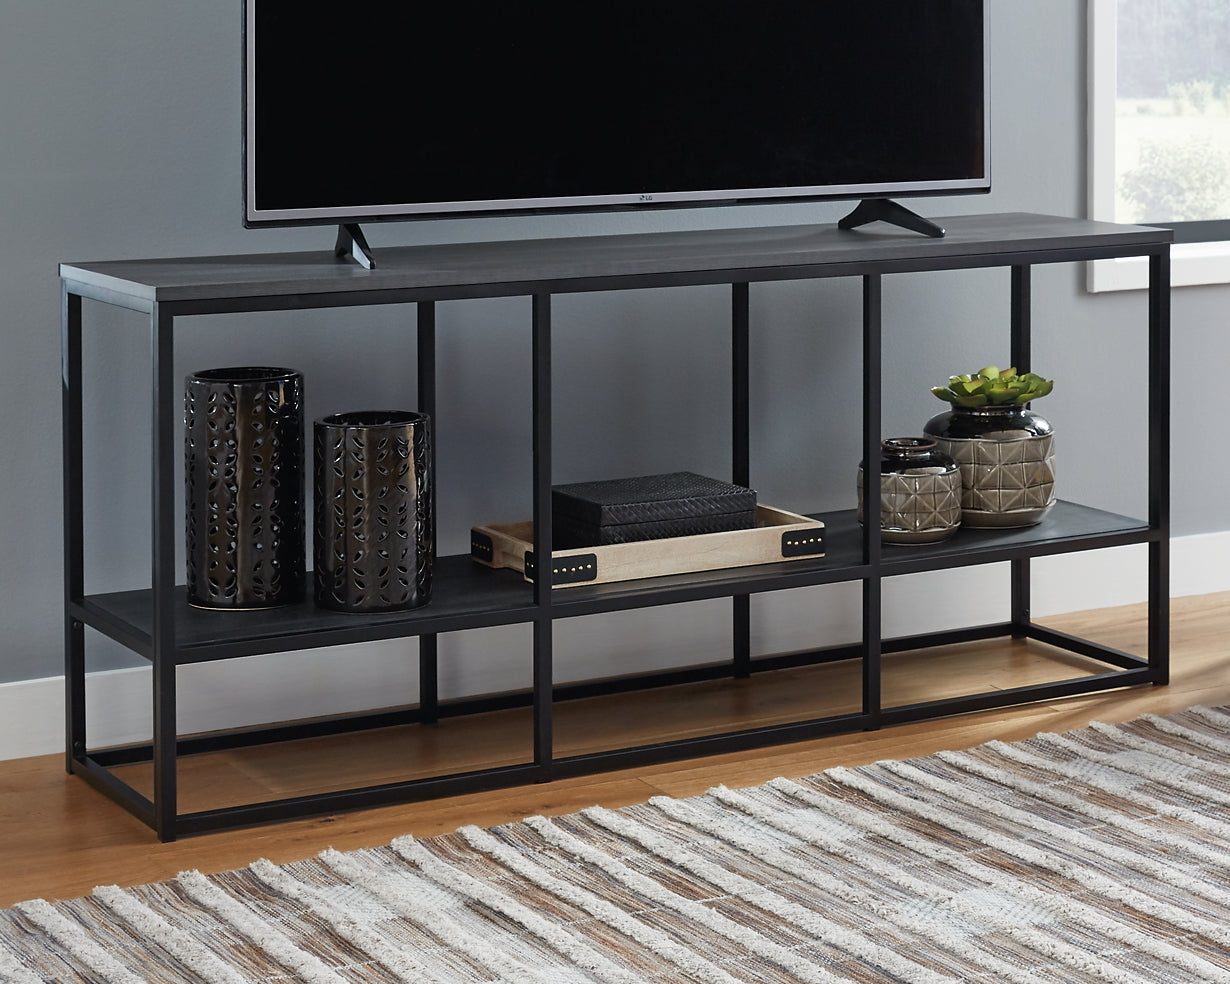 Ashley Express - Yarlow Extra Large TV Stand Wilson Furniture (OH)  in Bridgeport, Ohio. Serving Bridgeport, Yorkville, Bellaire, & Avondale